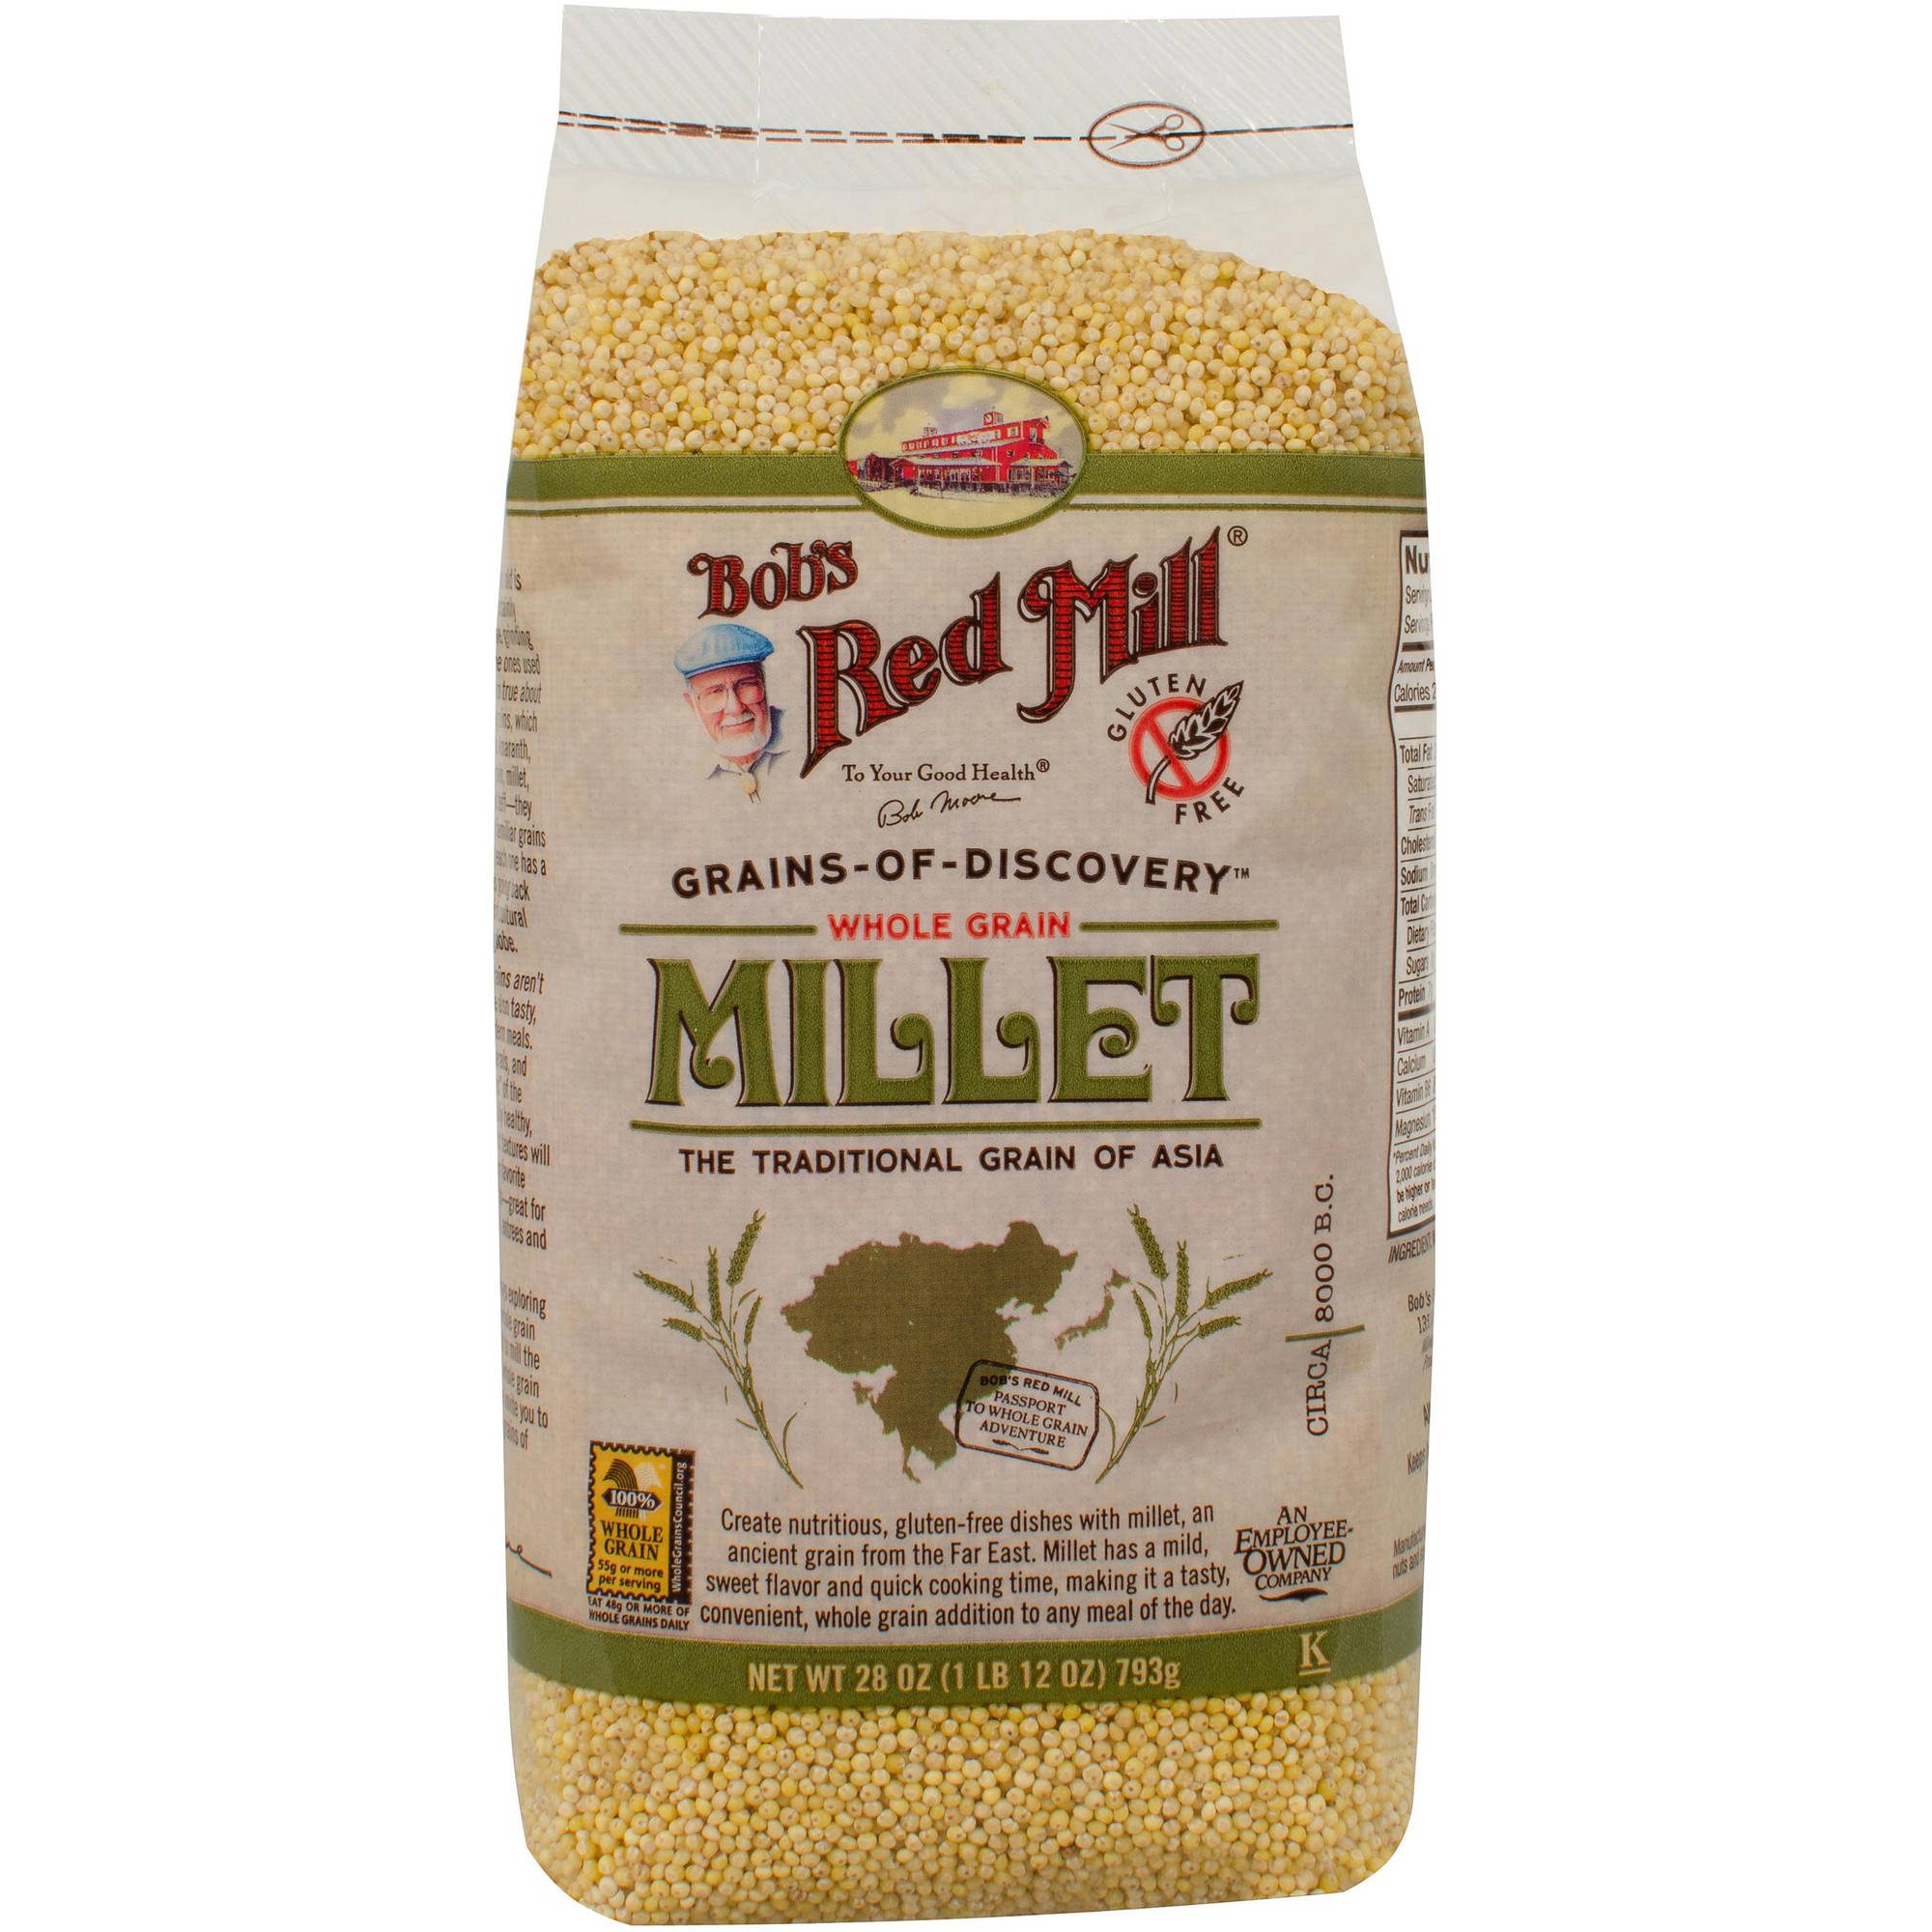 Bob's Red Mill Whole Grain Hulled Millet, 28 oz (Pack of 4) - image 1 of 3